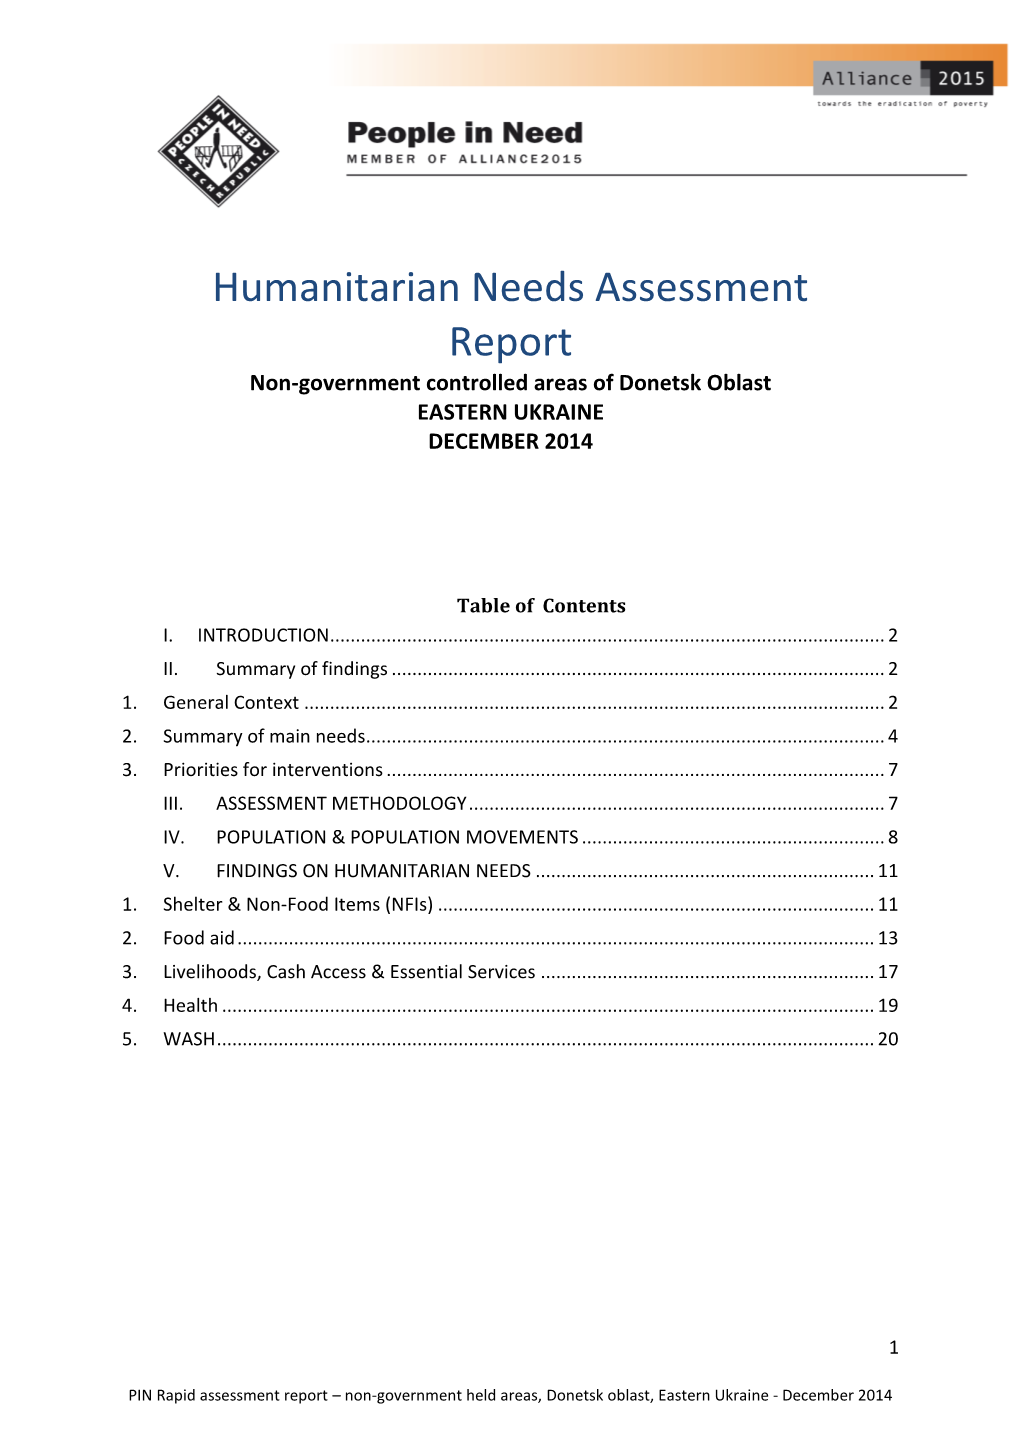 Humanitarian Needs Assessment Report Non-Government Controlled Areas of Donetsk Oblast EASTERN UKRAINE DECEMBER 2014